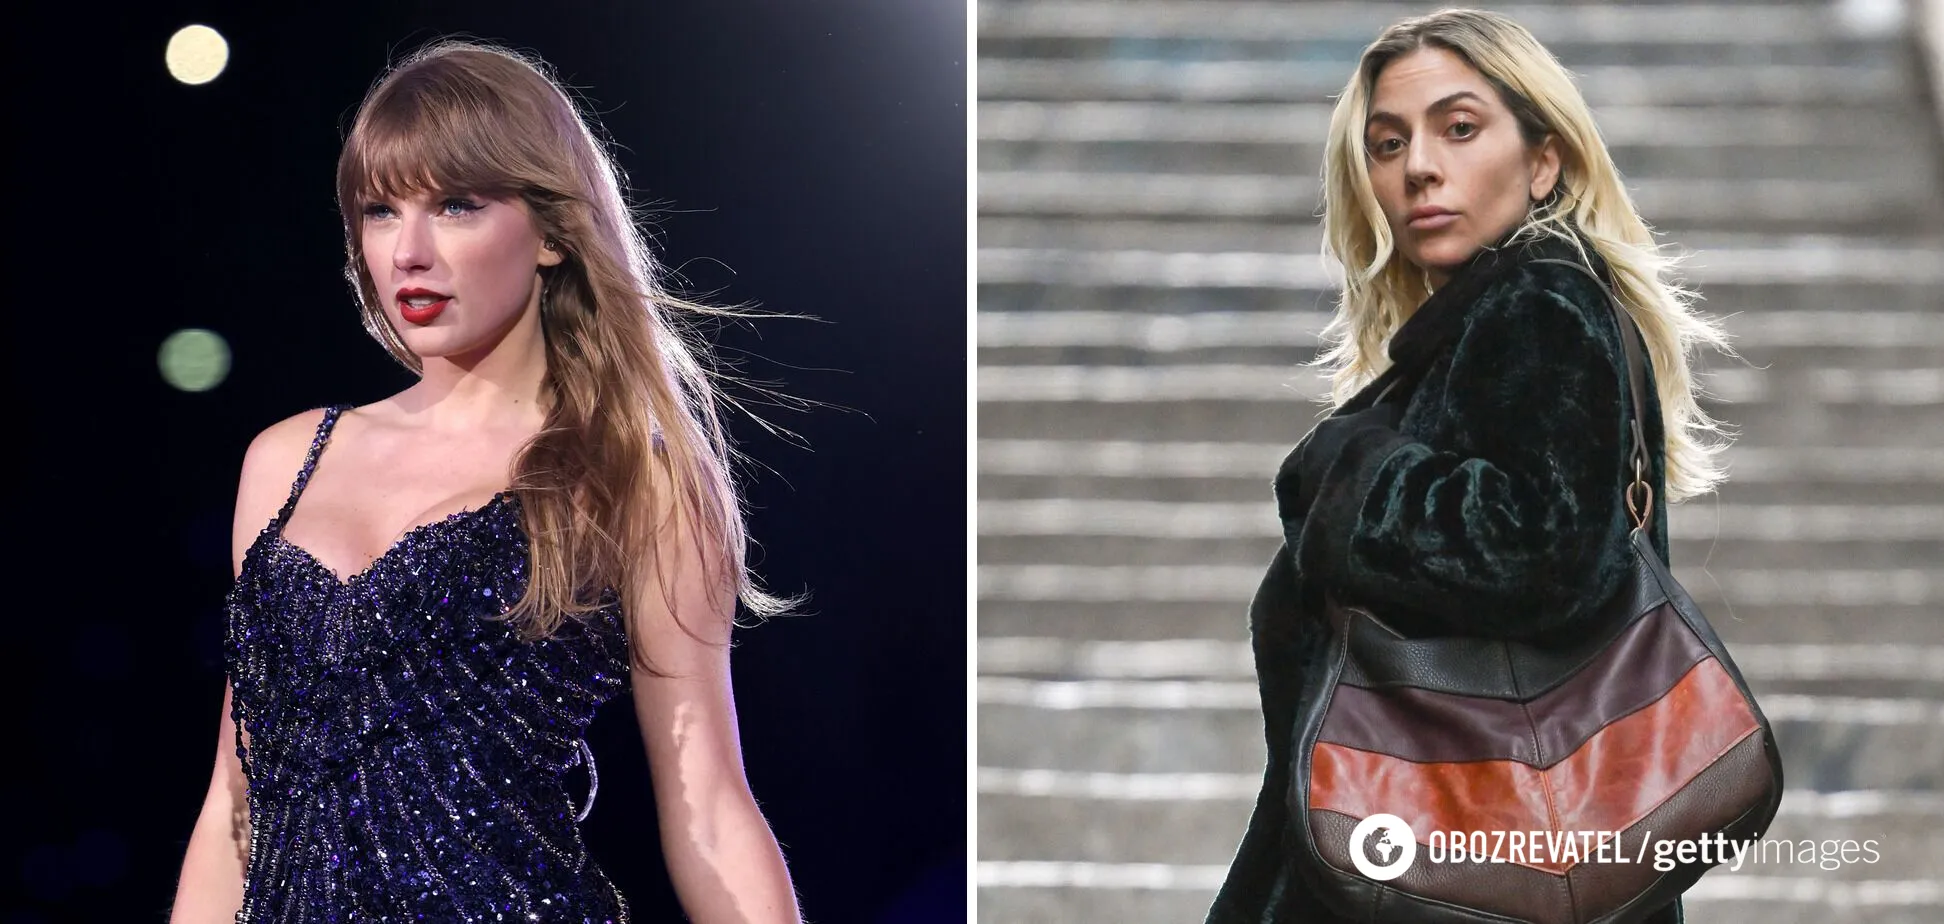 ''It is invasive and irresponsible to comment on a woman's body'': Taylor Swift publicly supported Lady Gaga, whom the media suspected of being pregnant